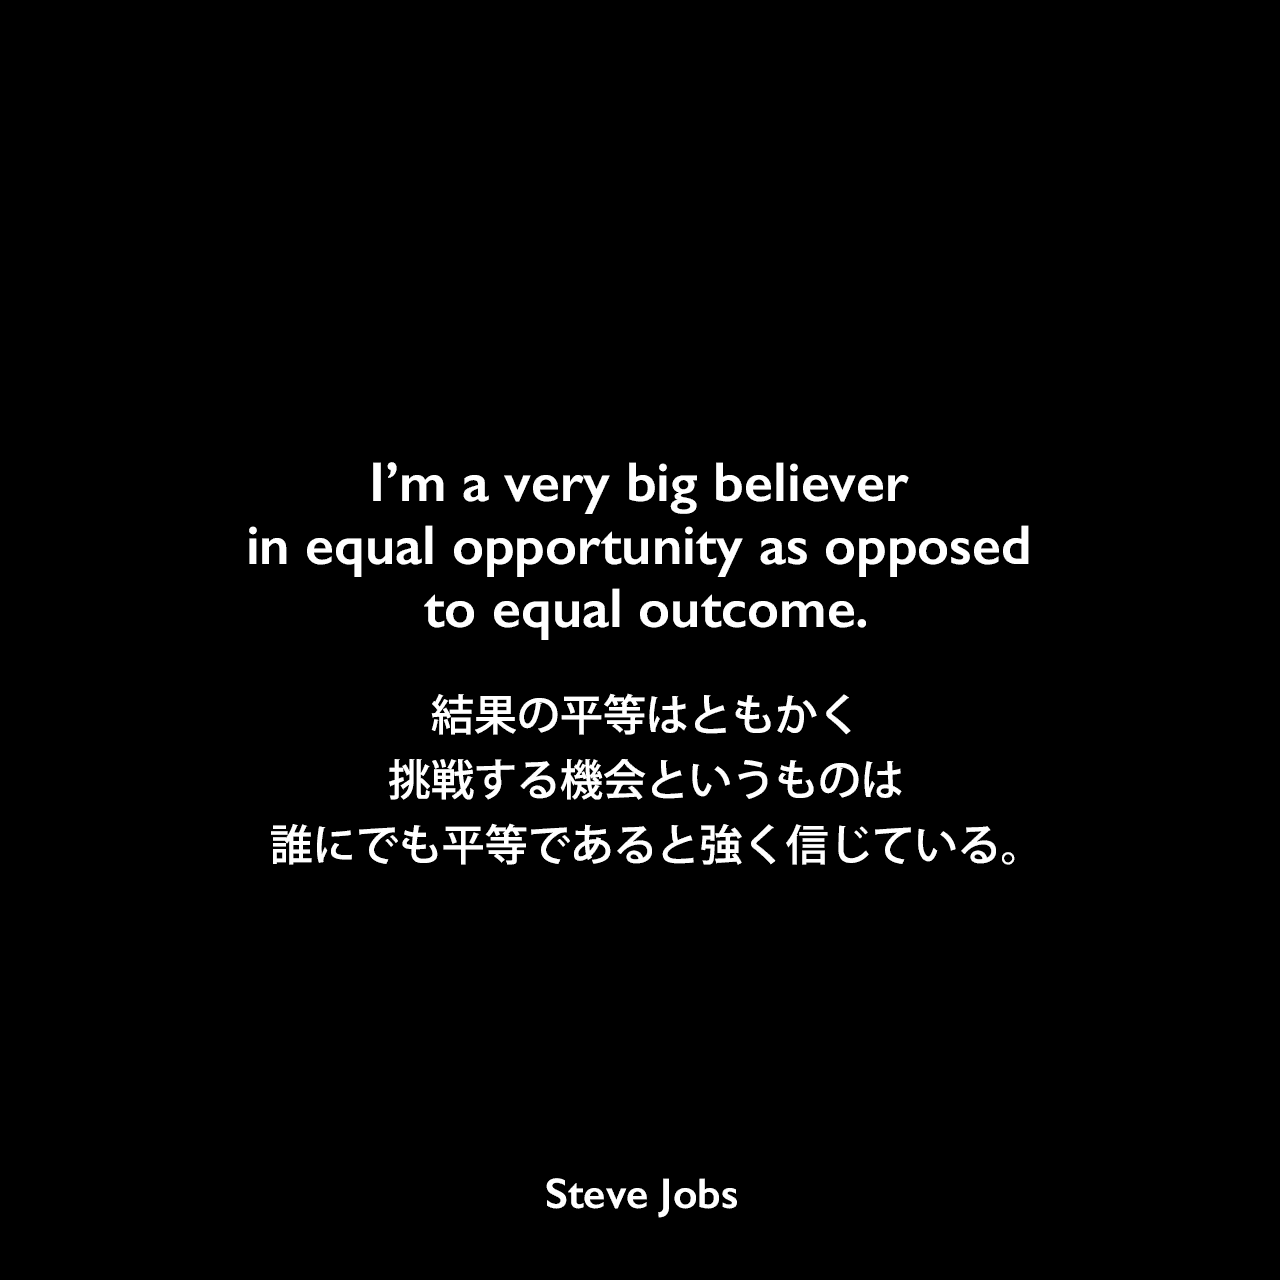 I’m a very big believer in equal opportunity as opposed to equal outcome.結果の平等はともかく、挑戦する機会というものは誰にでも平等であると強く信じている。Steve Jobs